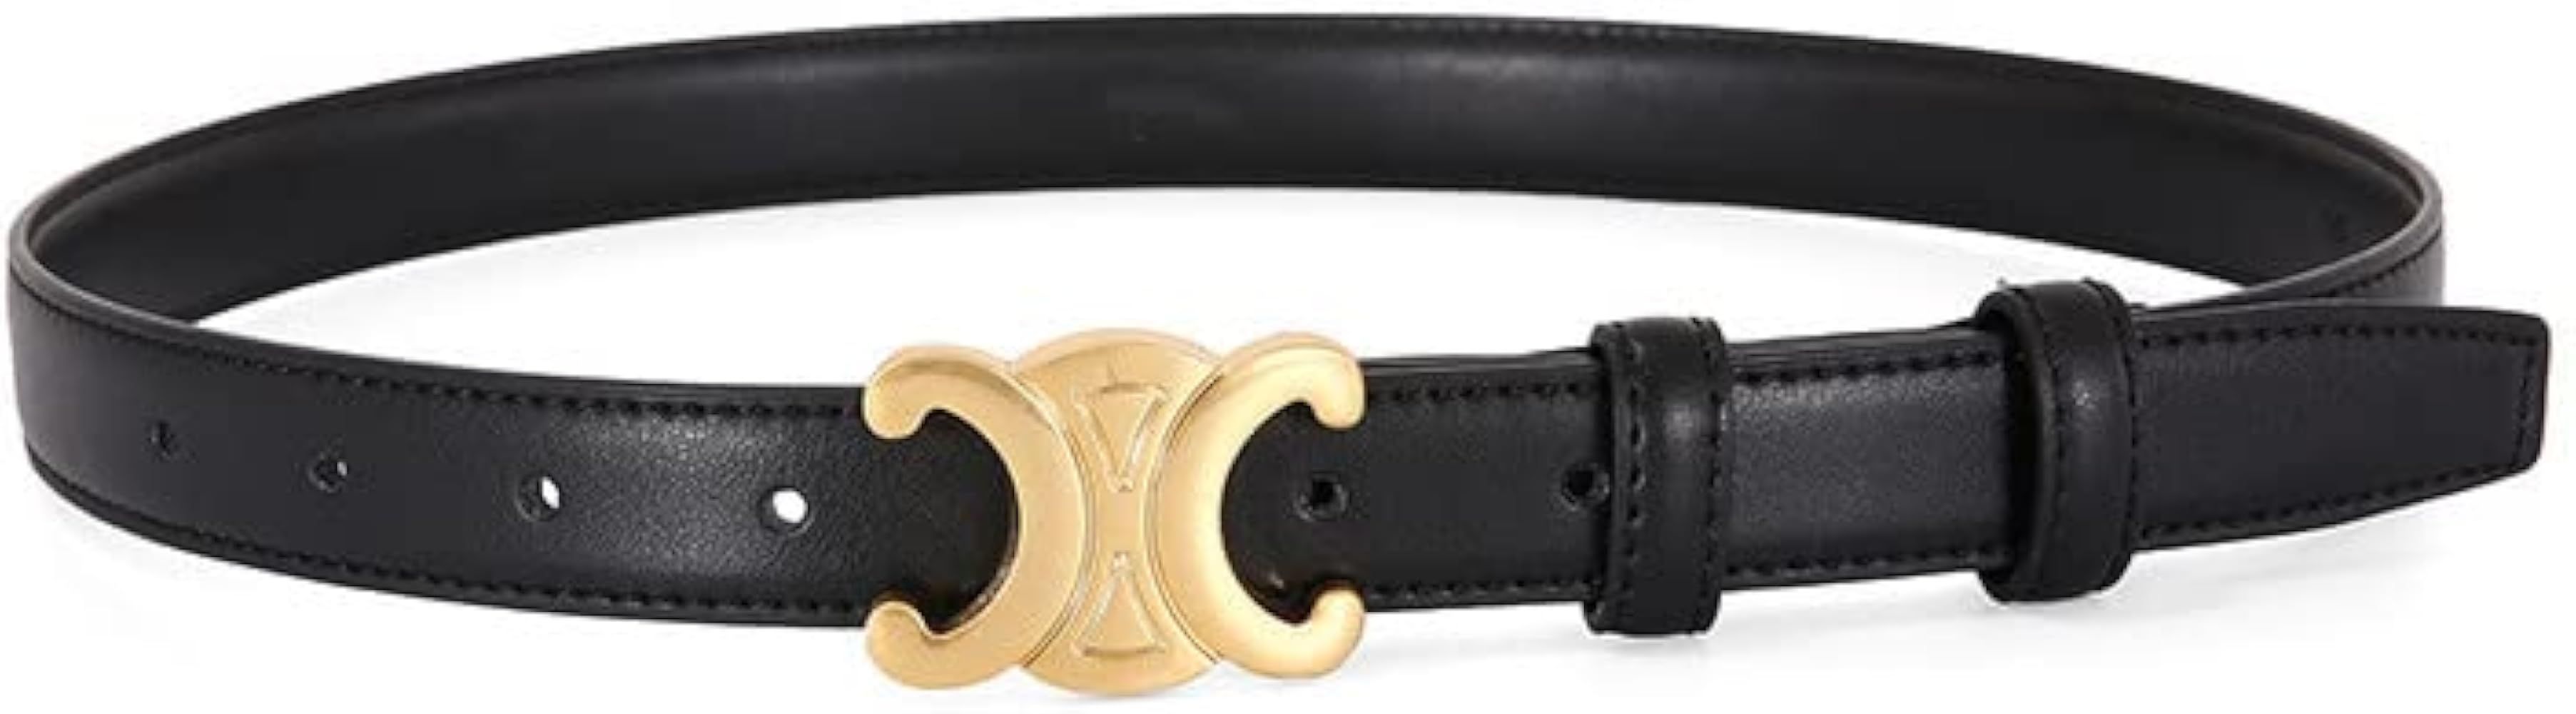 MVJIESA Womens 2.5cm Thin Leather Belt With Gold Buckle Fashion Designer Belts For Jeans Pants Dr... | Amazon (US)